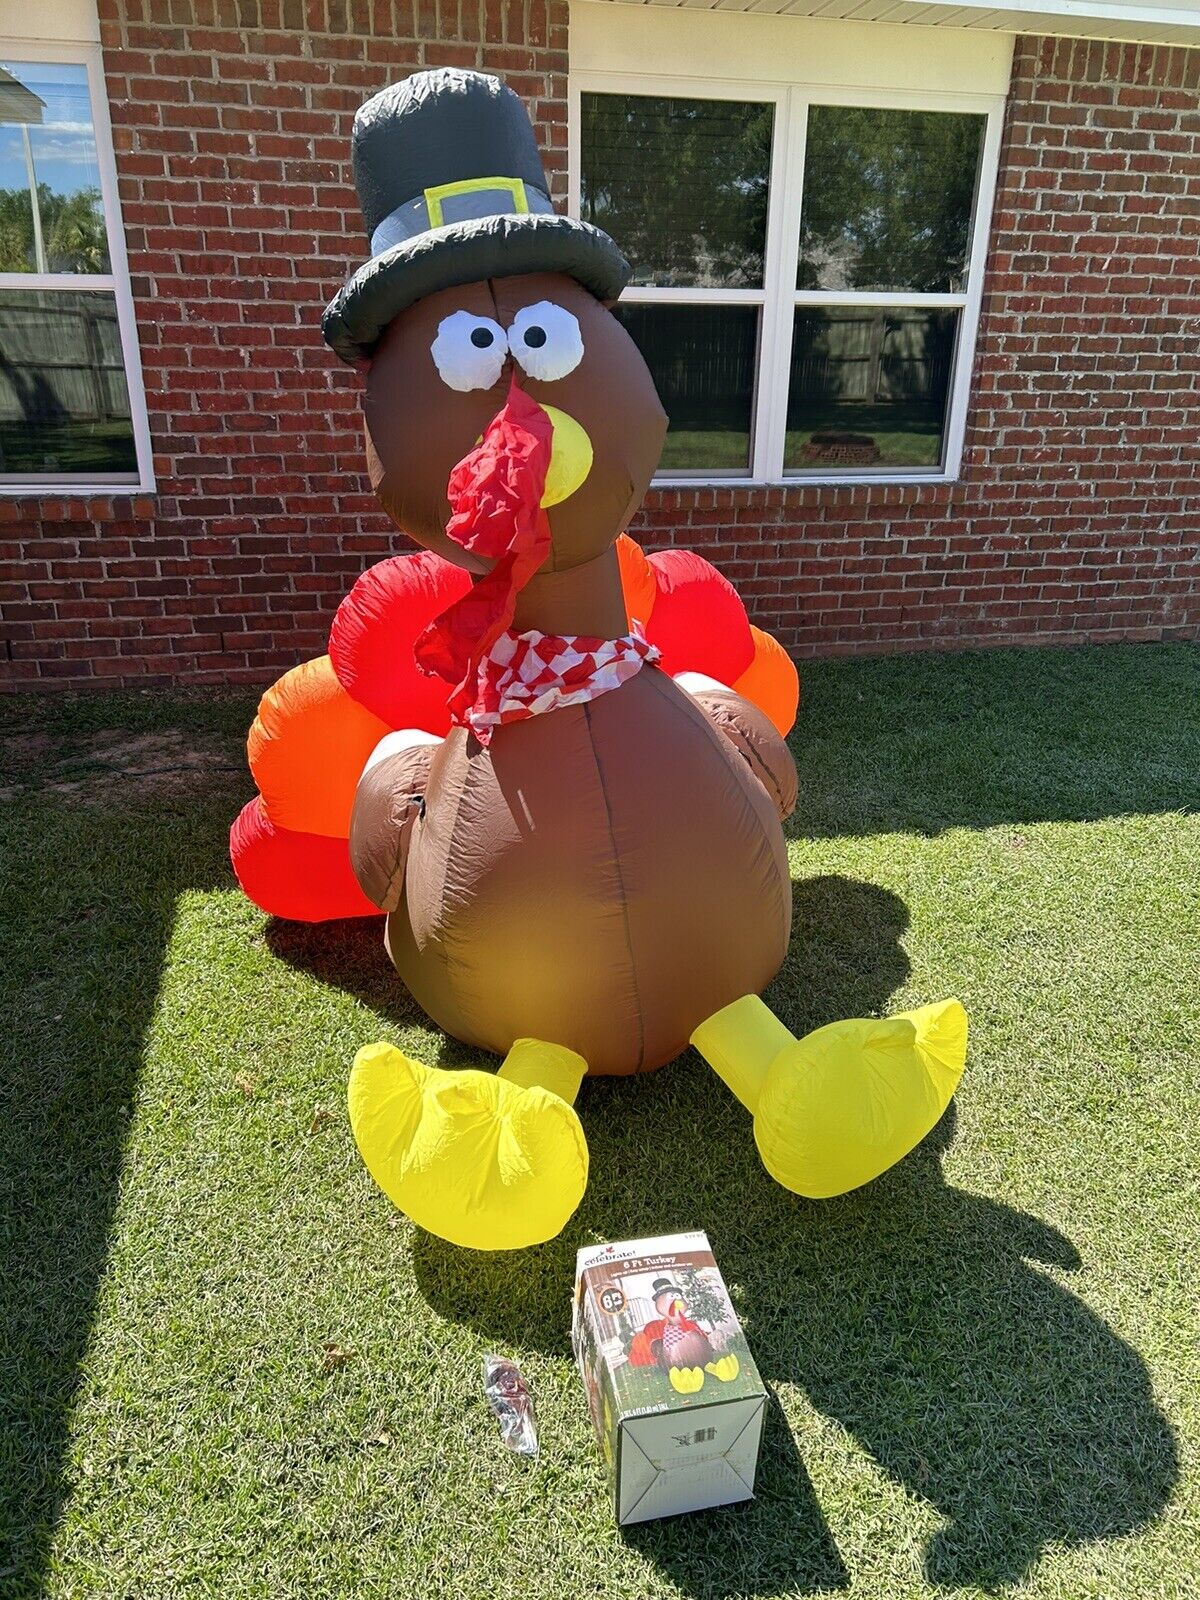 NEW OPEN BOX Turkey 6 Foot Lighted Airblown Inflatable QUALITY